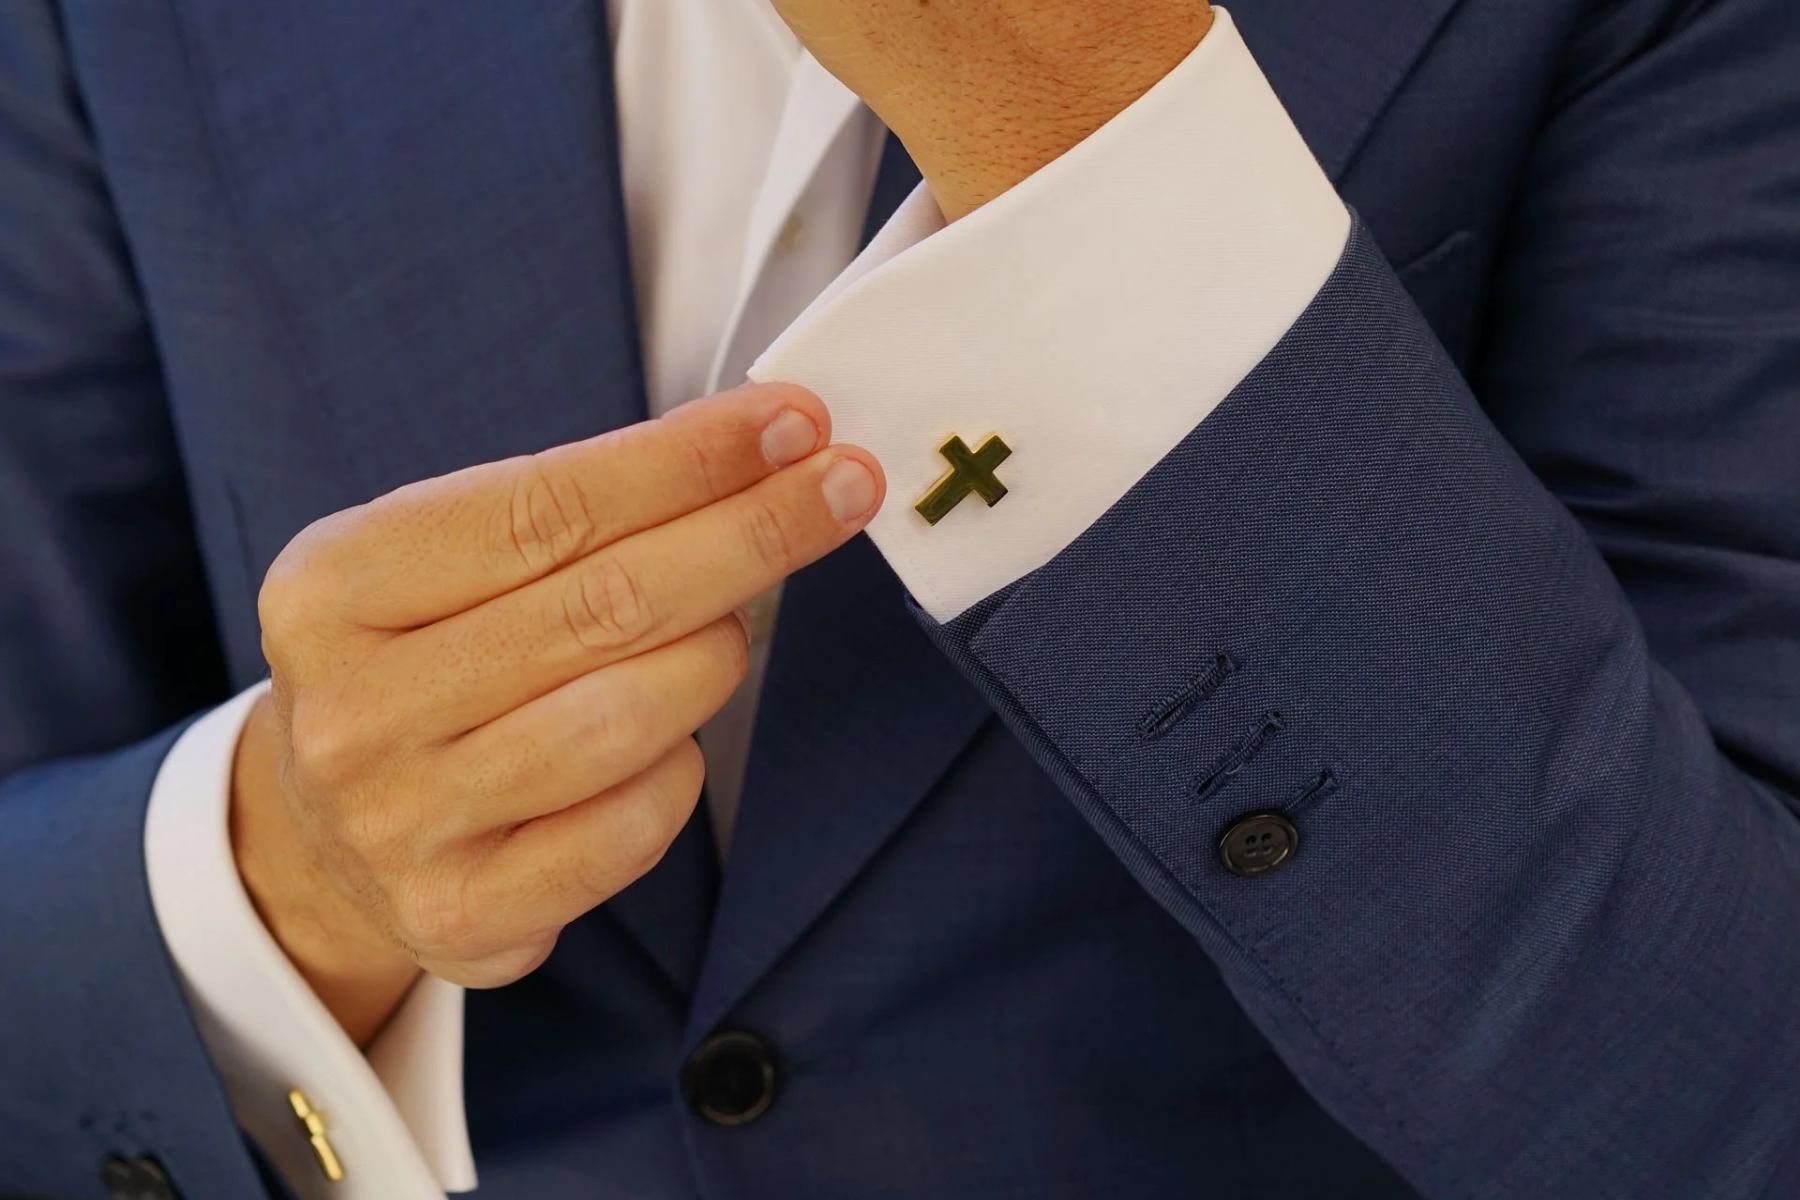 A navy blue suit with gold cross cufflinks worn by a man